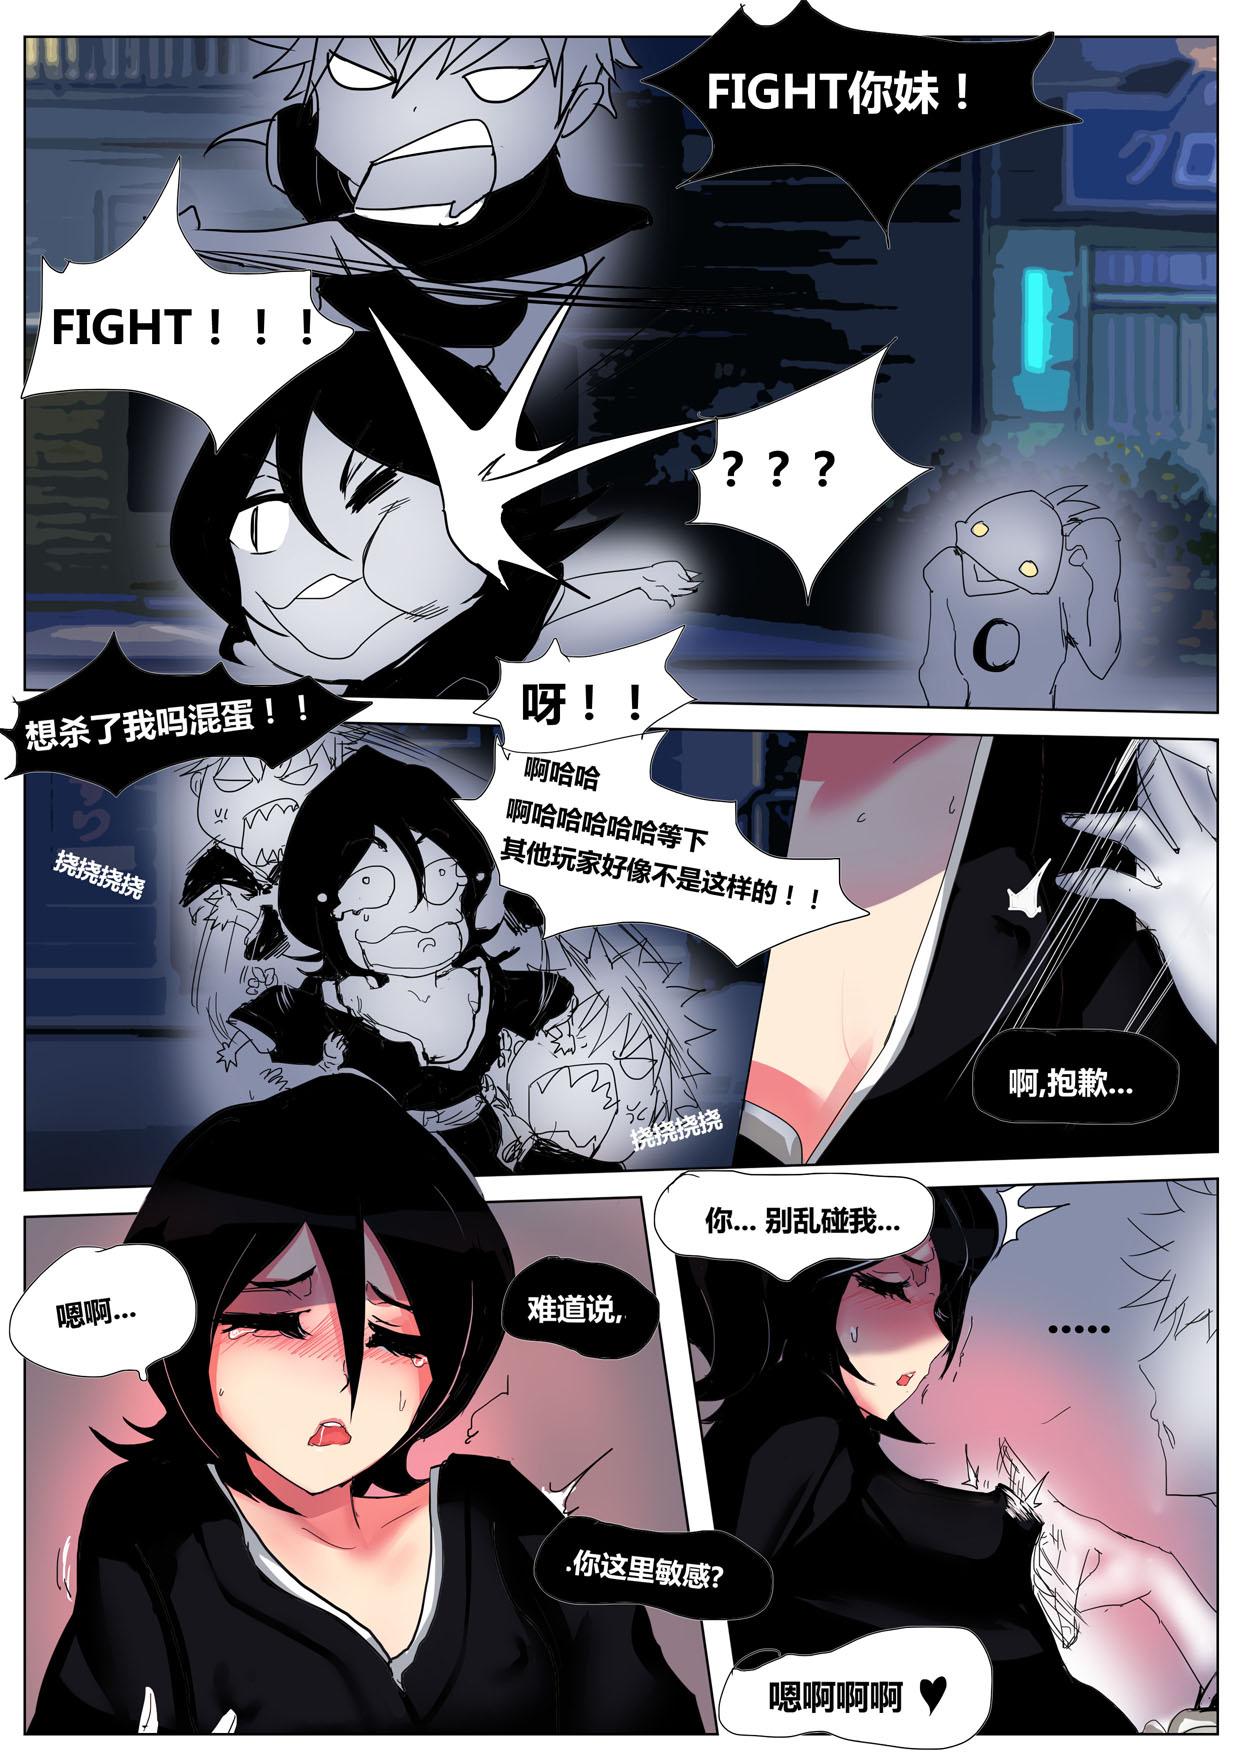 Hot Cunt Game Start - Bleach Swallow - Page 6